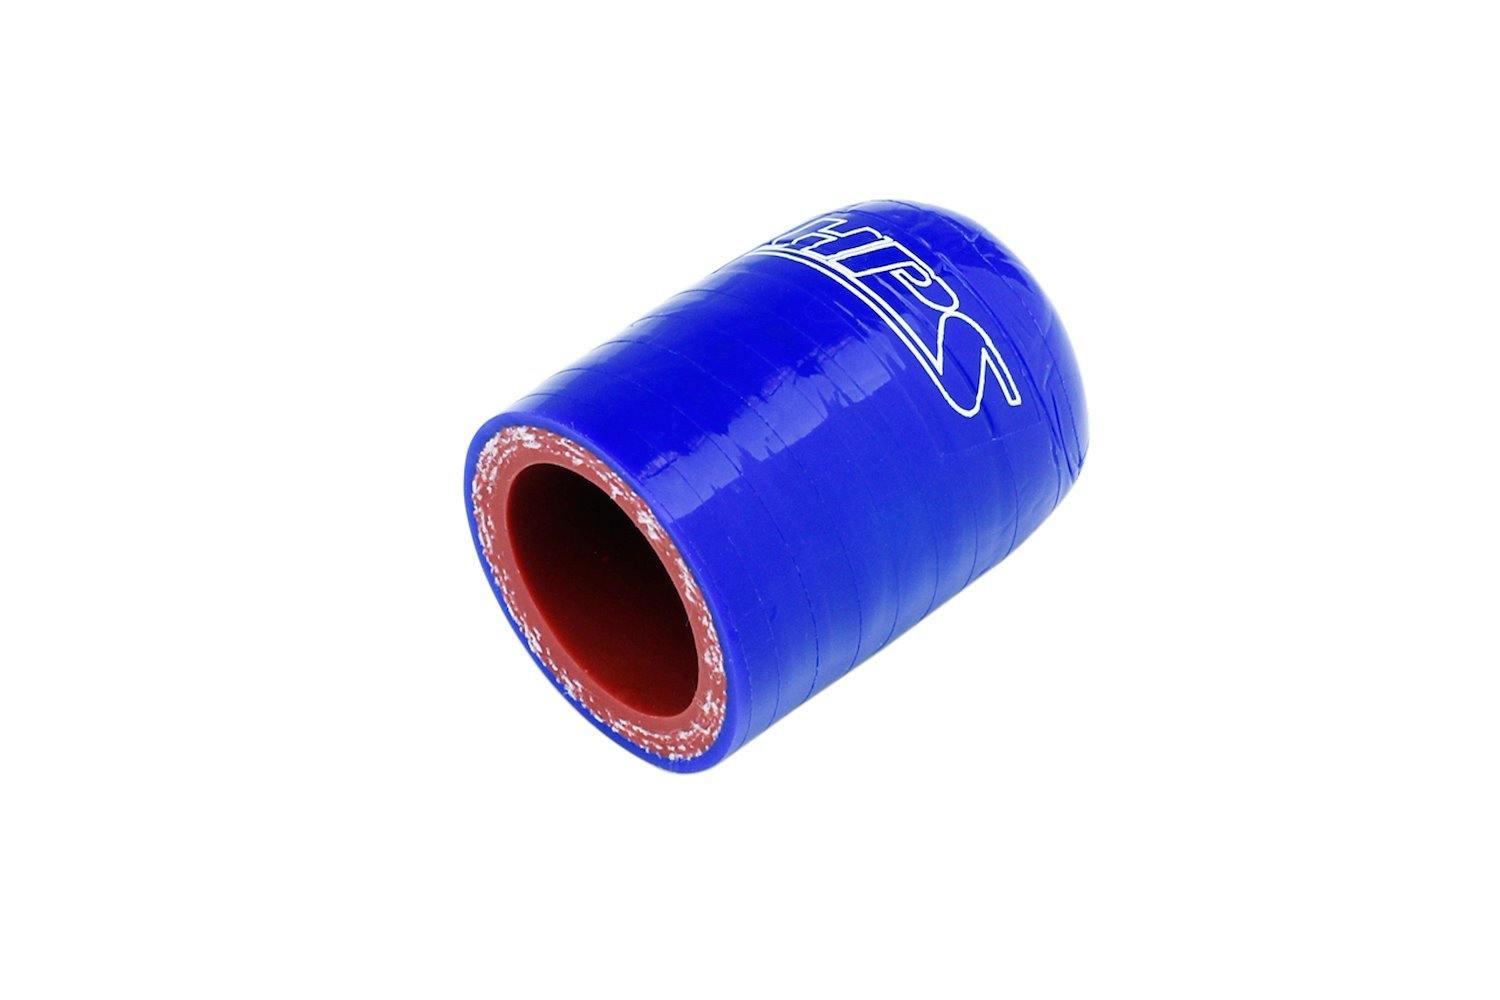 RSCC-100-BLUE Coolant Bypass Cap, 3-Ply Reinforced High-Temp. Silicone Bypass Cap, 1 in. ID, Blue